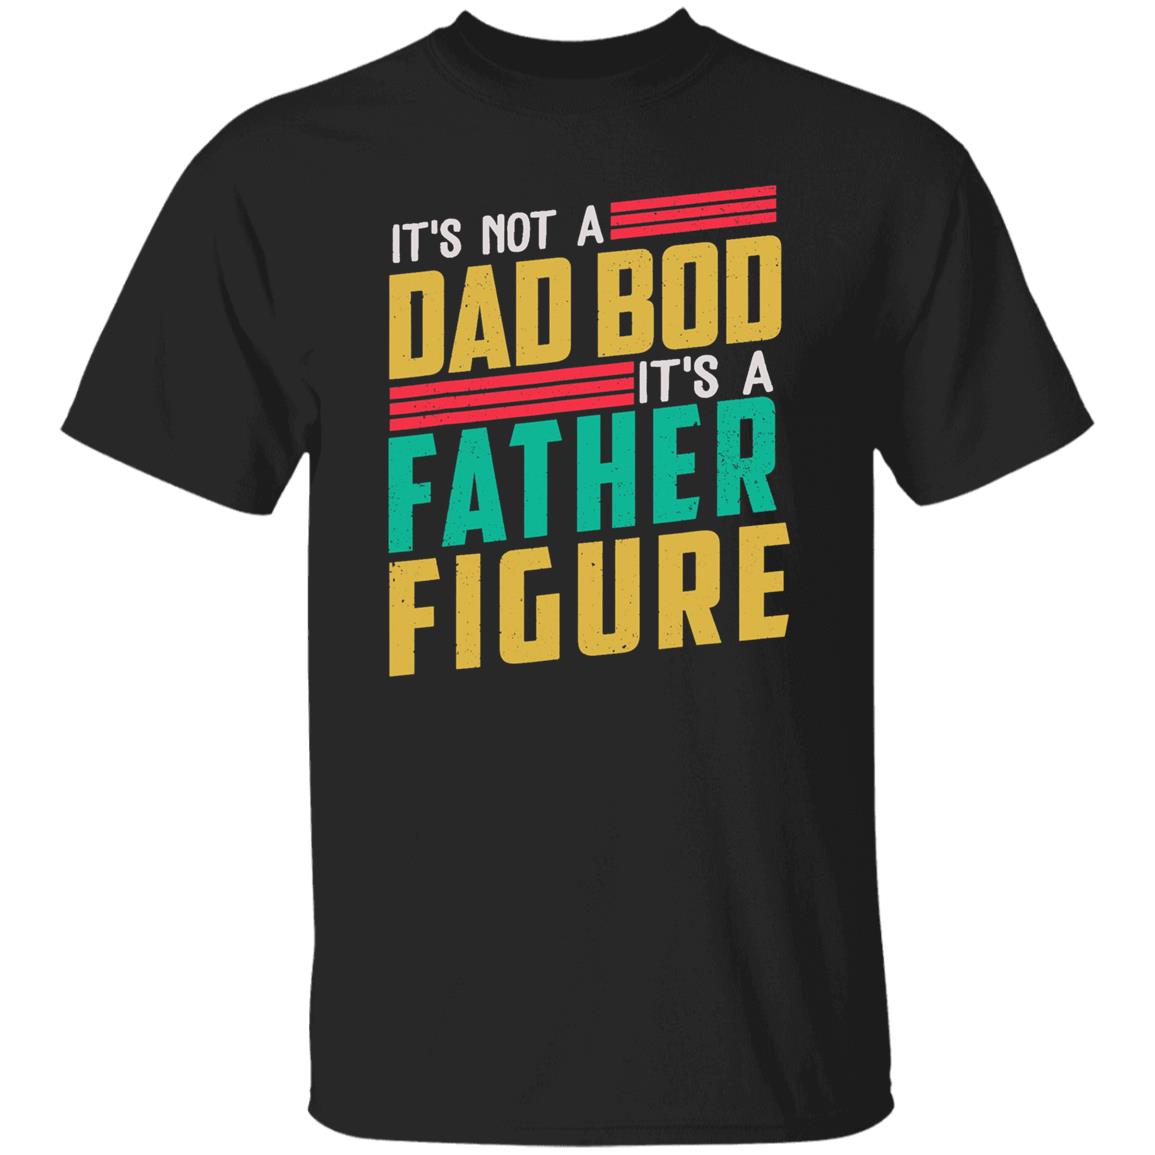 It's Not A Dad Bod It's A Father Figure, Funny Retro Vintage Shirt